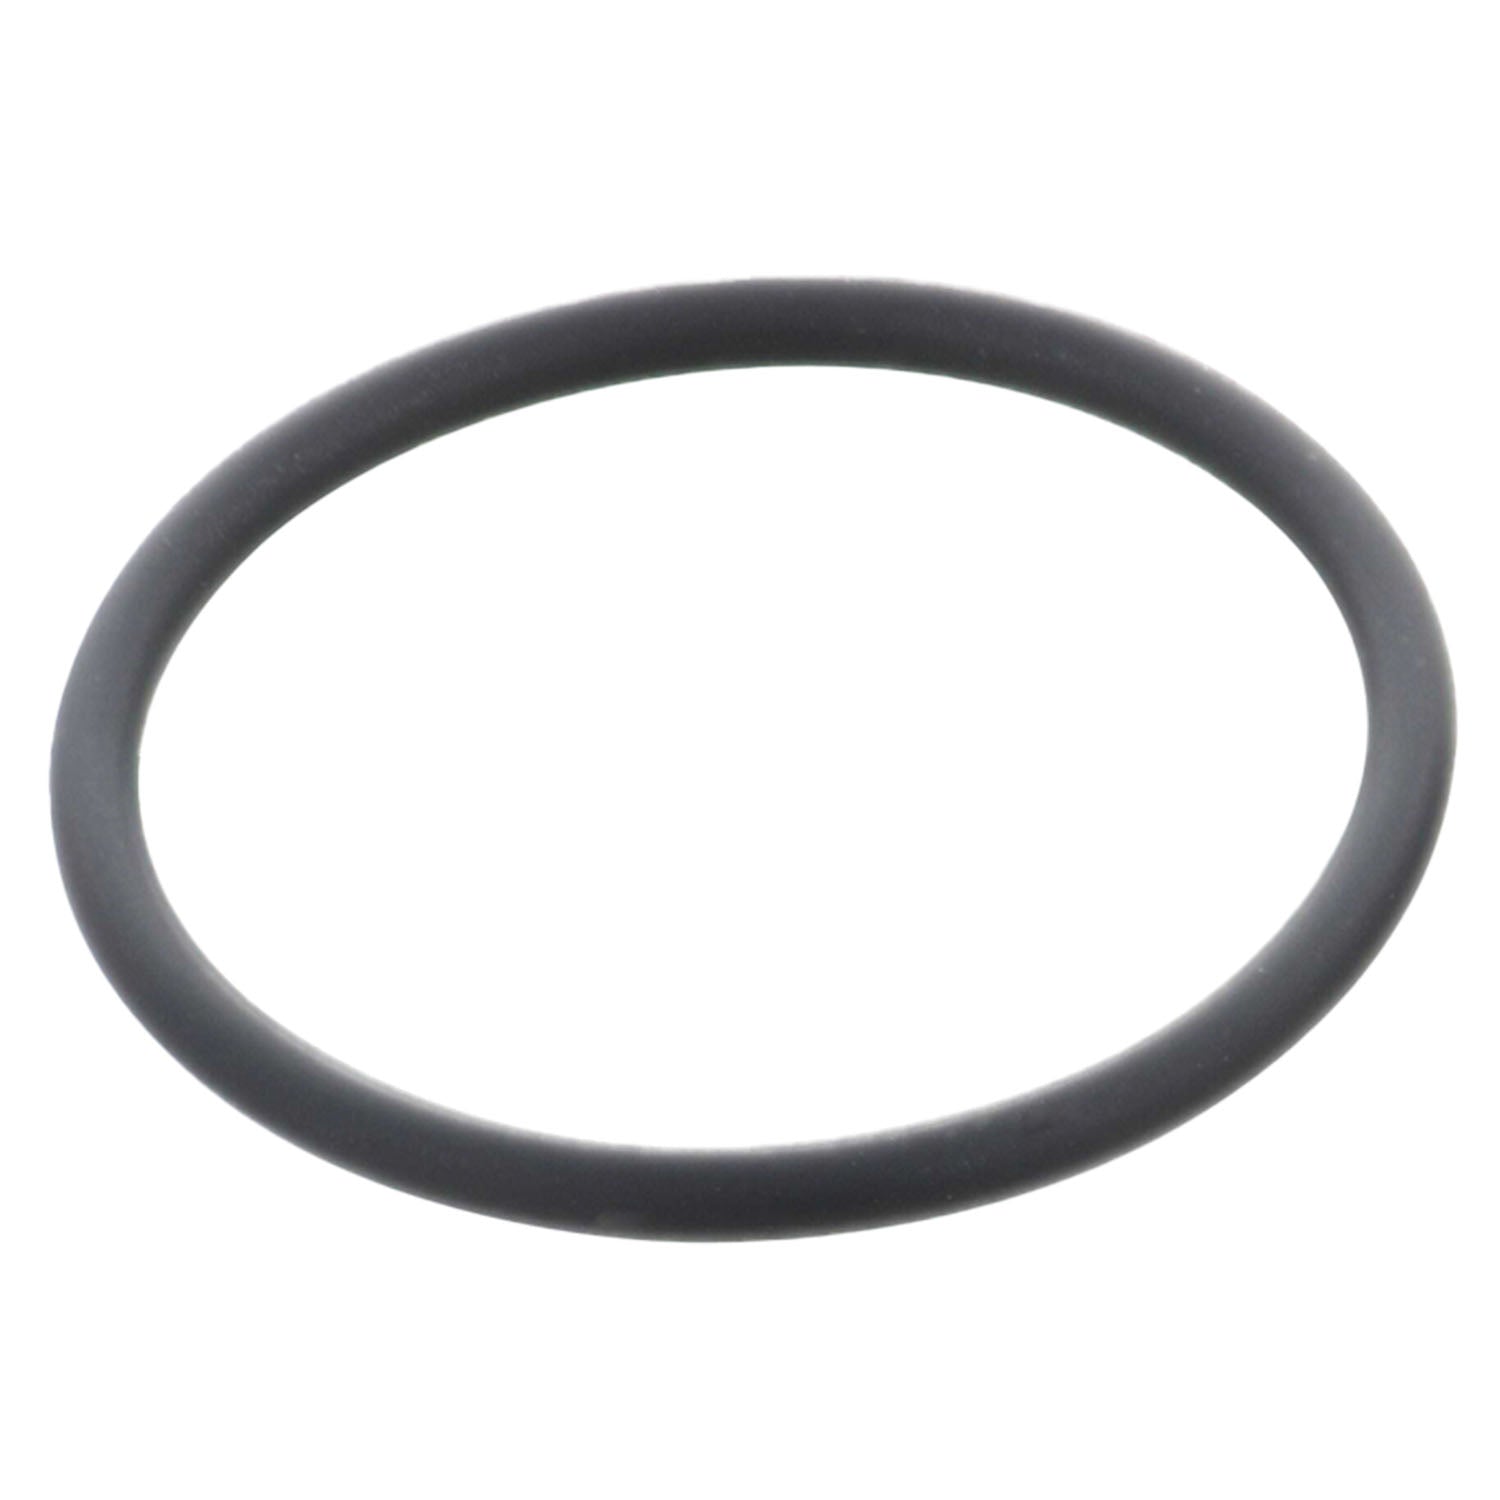 Thin, black rubber o-ring on a white background